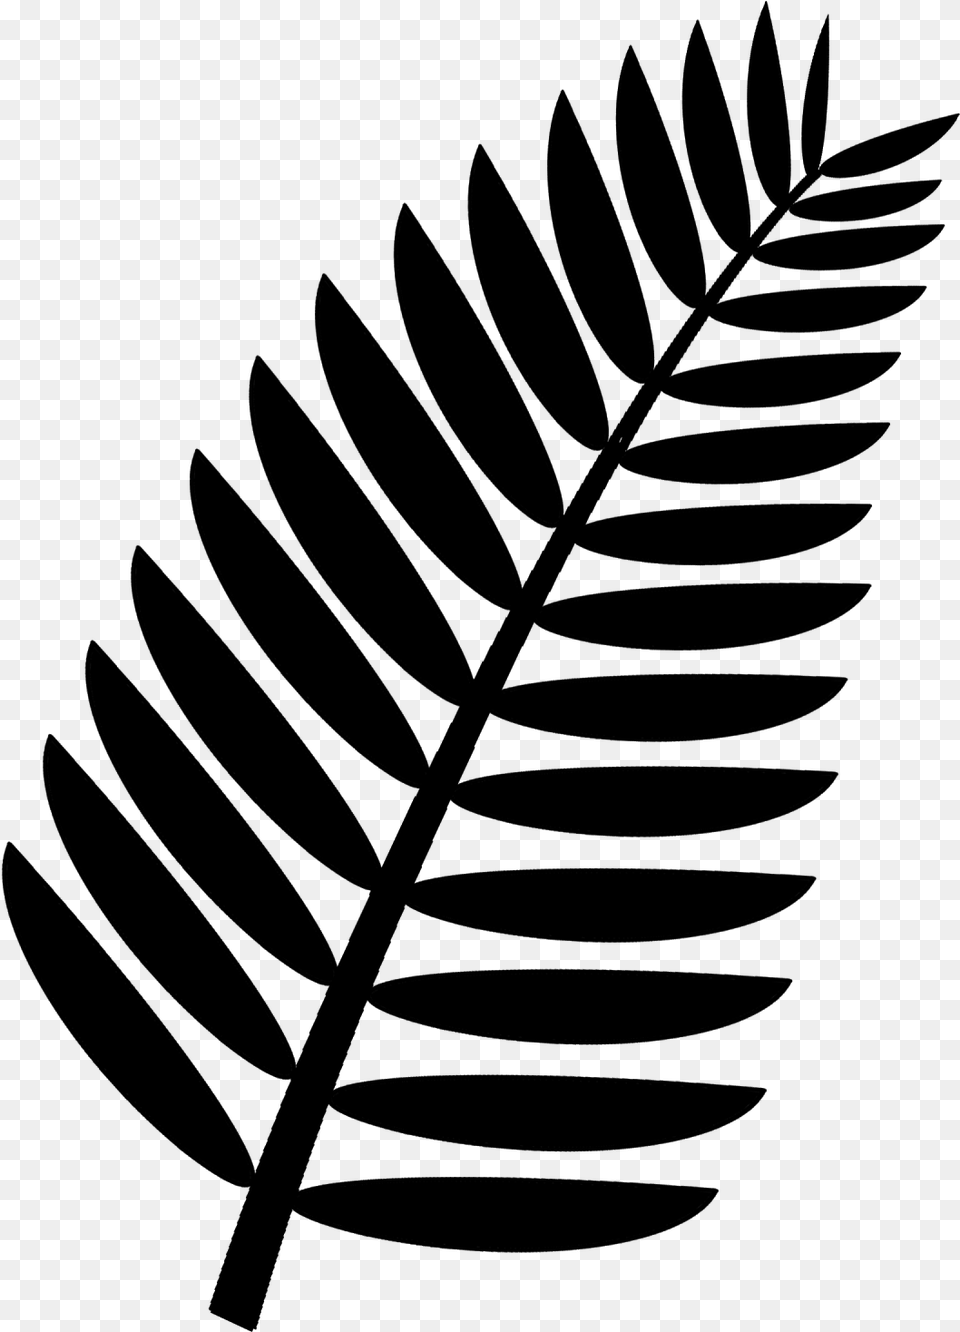 Graphic Black And White Download Frond Clip Art Palm Leaf Clipart Black And White, Spiral Free Transparent Png